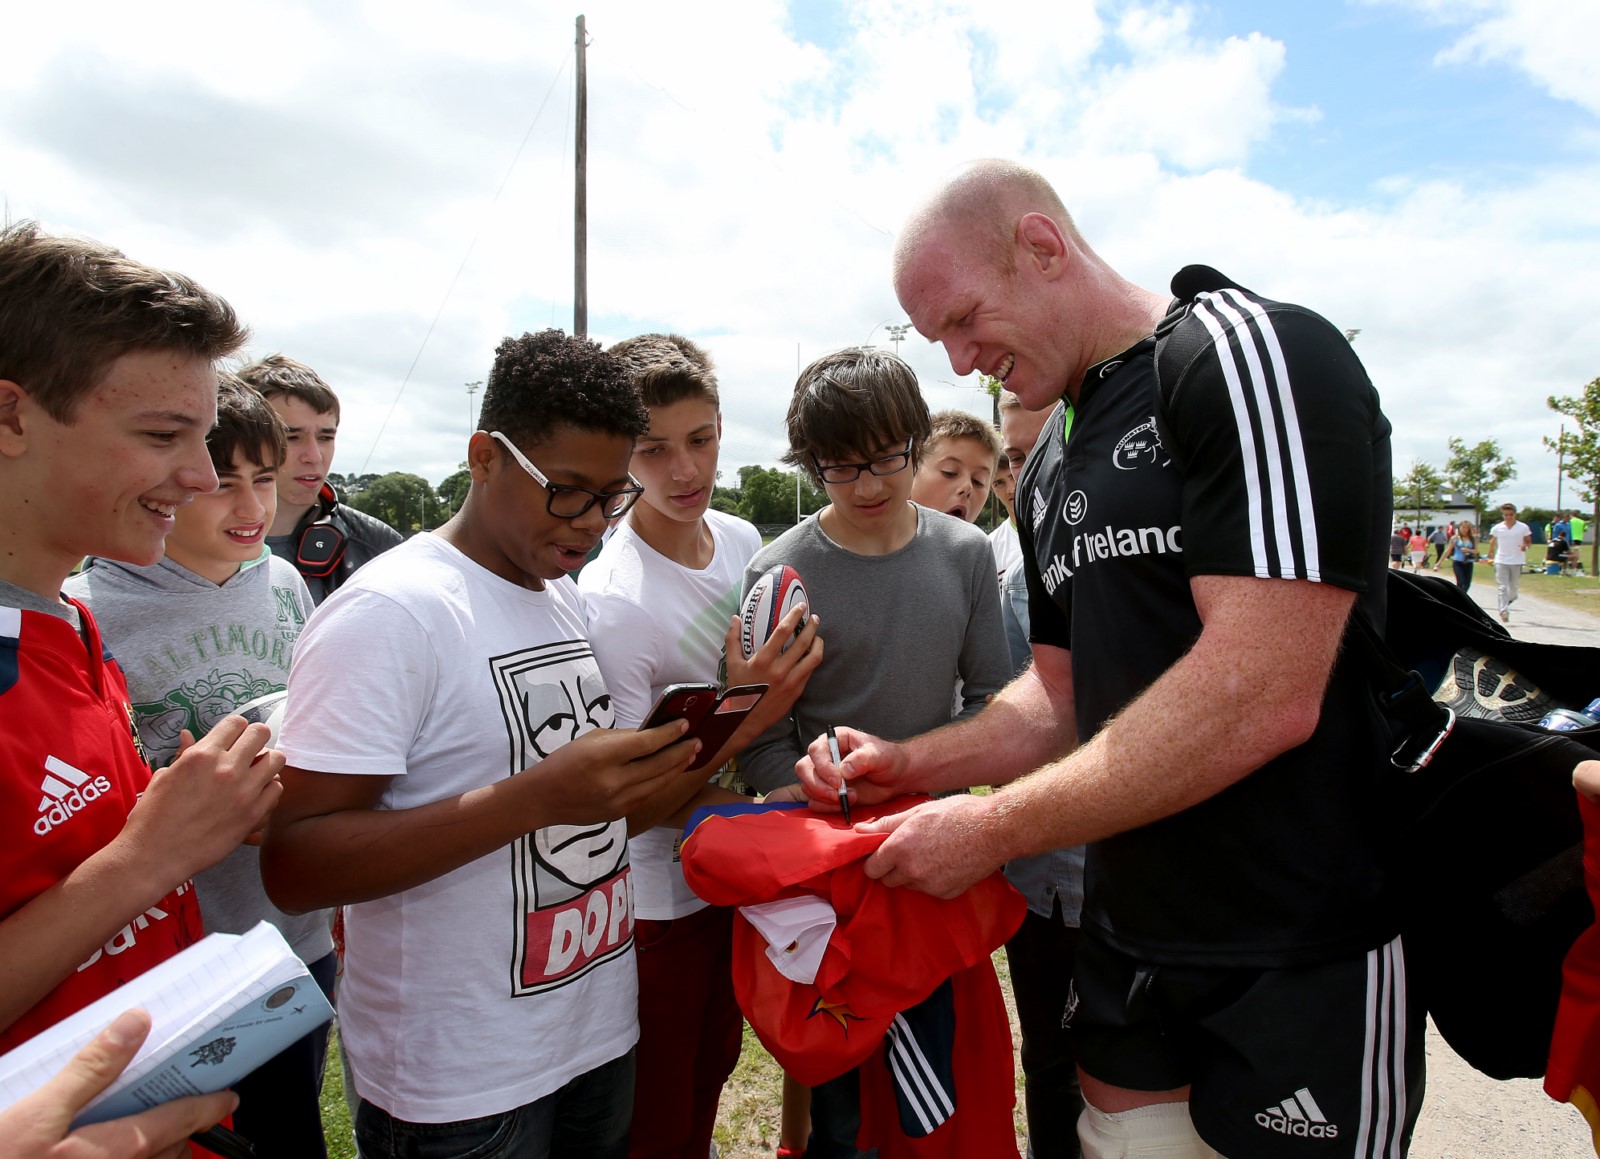 Anglais et Rugby avec le Munster Rugby Club